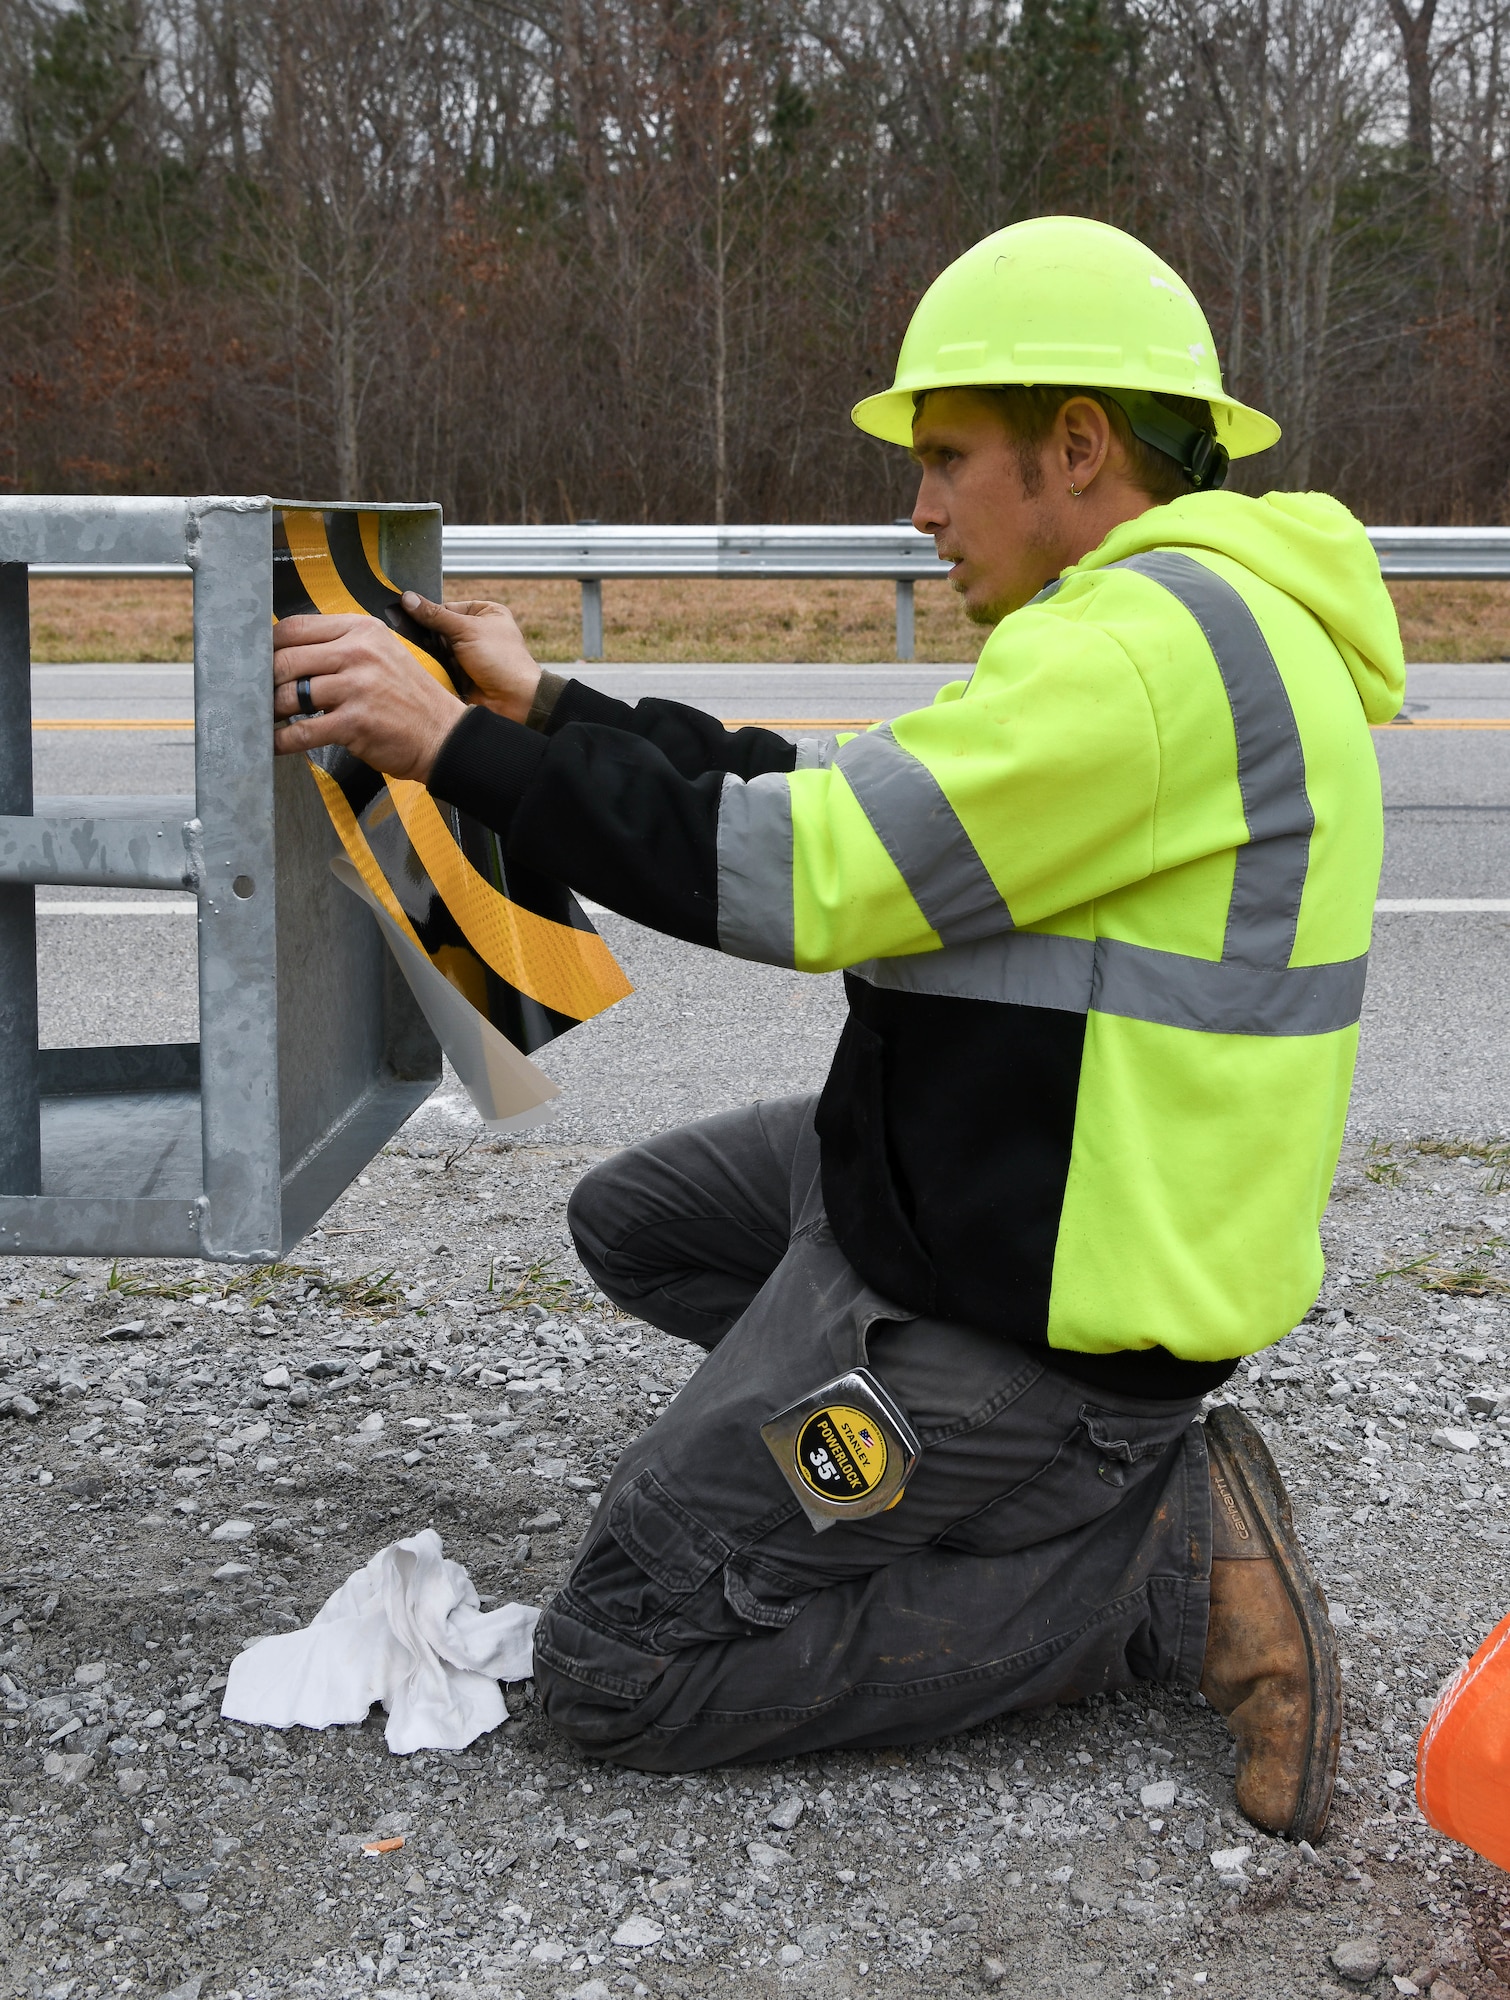 Billy Clemons adds a sticker to the end of a section of guardrail to improve visibility of the hardware as he and a crew install new guardrails along Wattendorf Memorial Highway at Arnold Air Force Base, Tenn., Jan. 27, 2021. Guardrails were added to areas where the shoulder drops off and at bridge ends to increase safety for motorists. (U.S. Air Force photo by Jill Pickett)